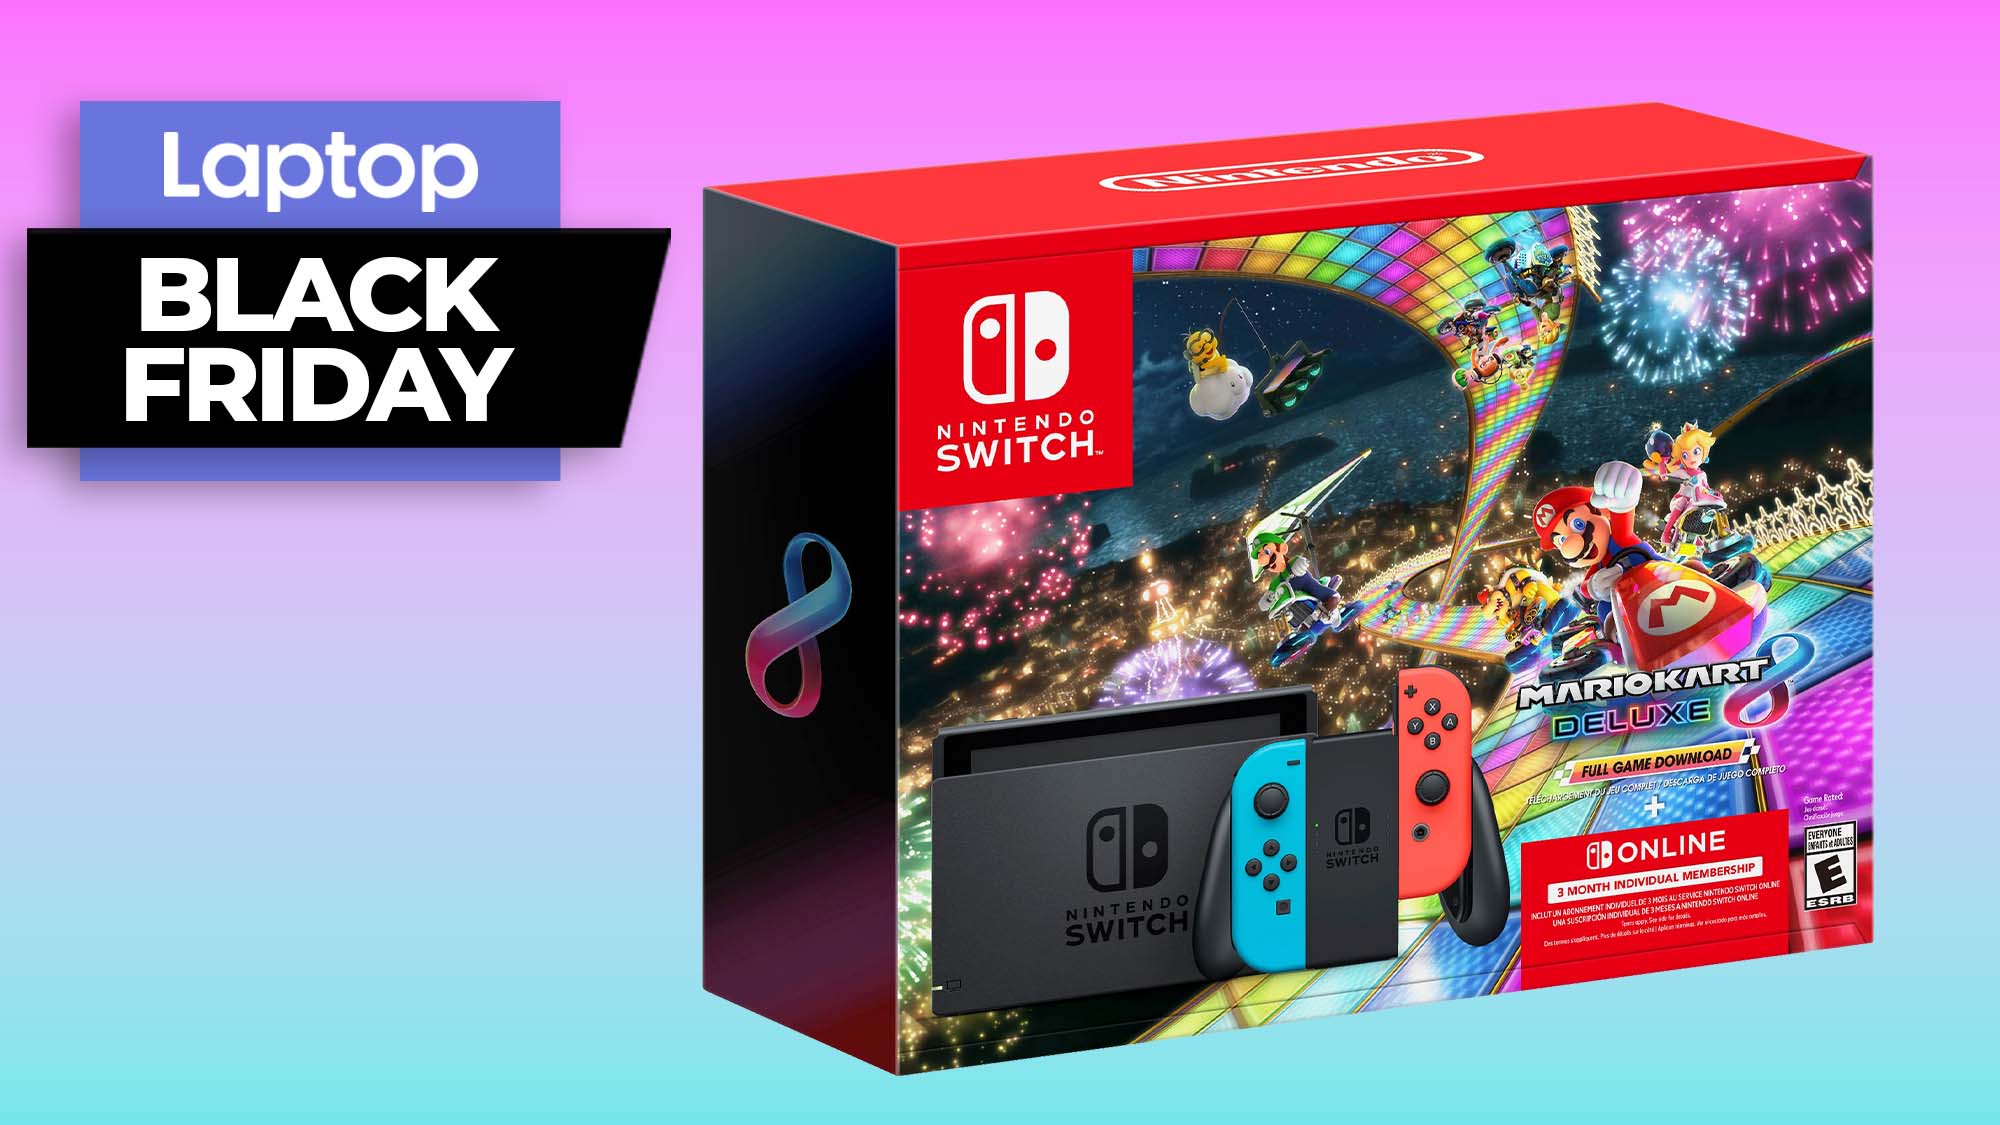 Nintendo Switch Mario Kart 8 Deluxe bundle box on a gradient background with a Black Friday banner in the upper left corner